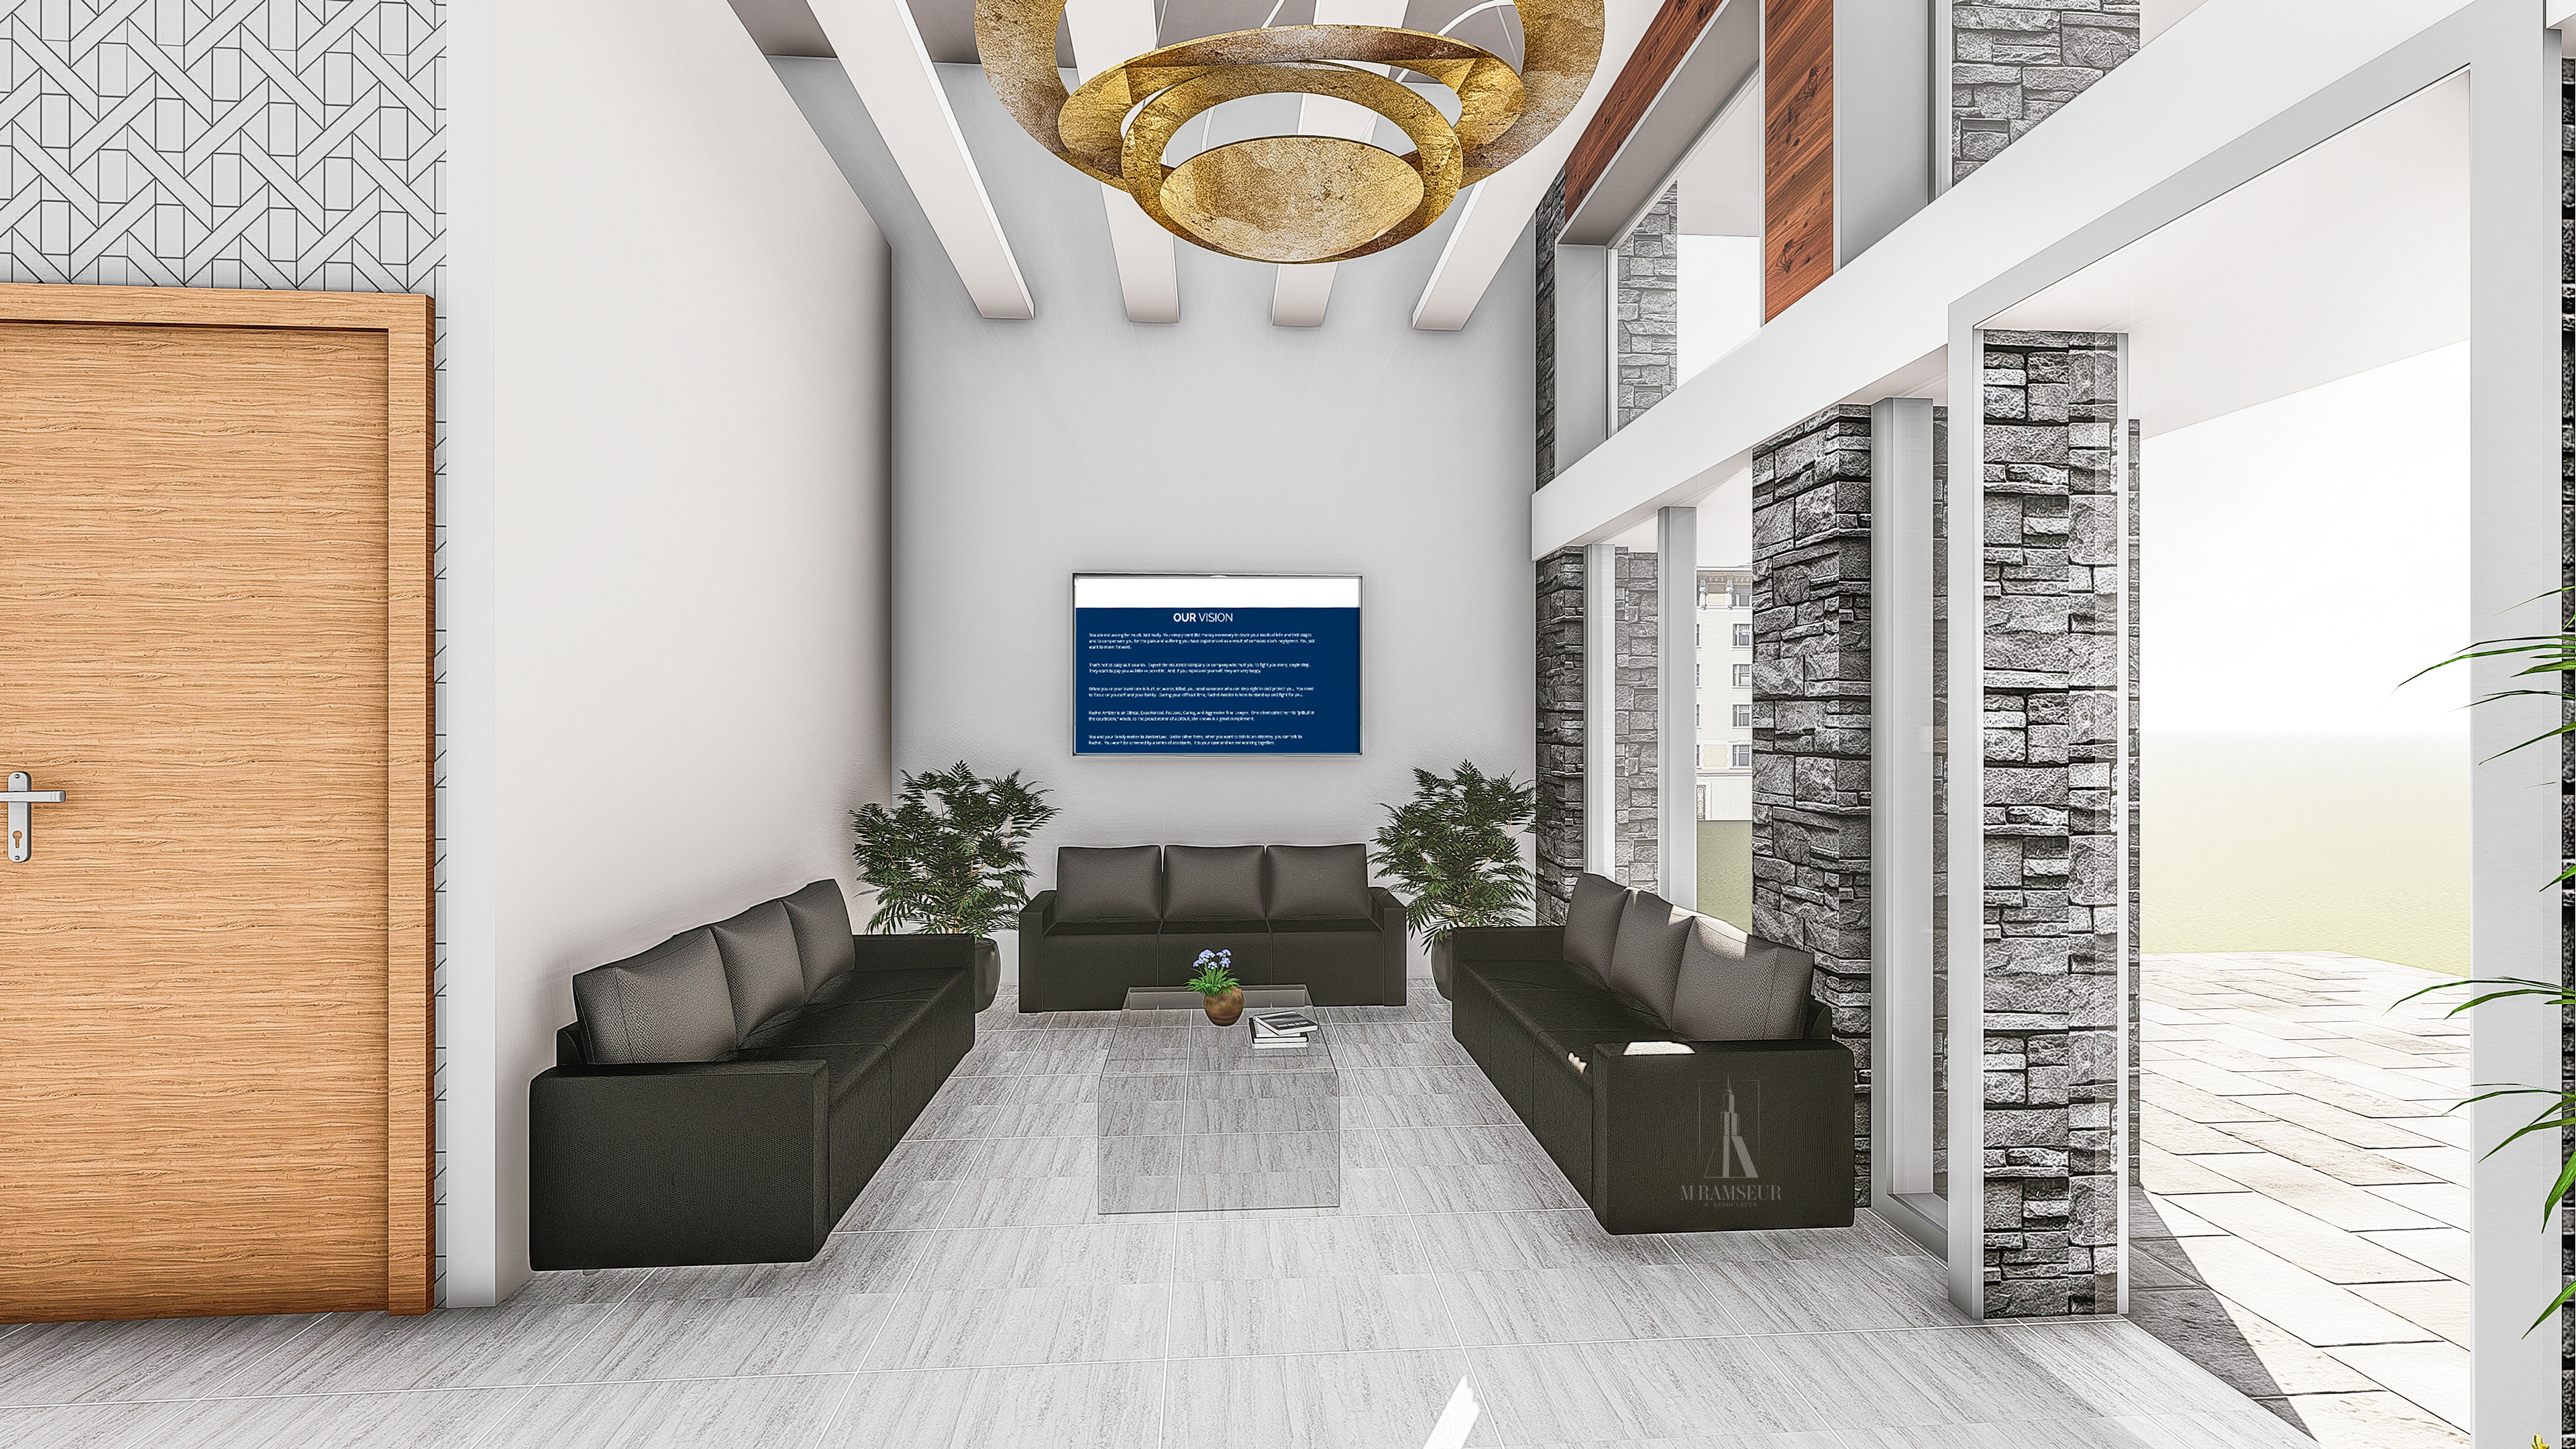 SCHEMATIC DESIGN LAW OFFICE CONCEPT WAITING AREA RENDERING